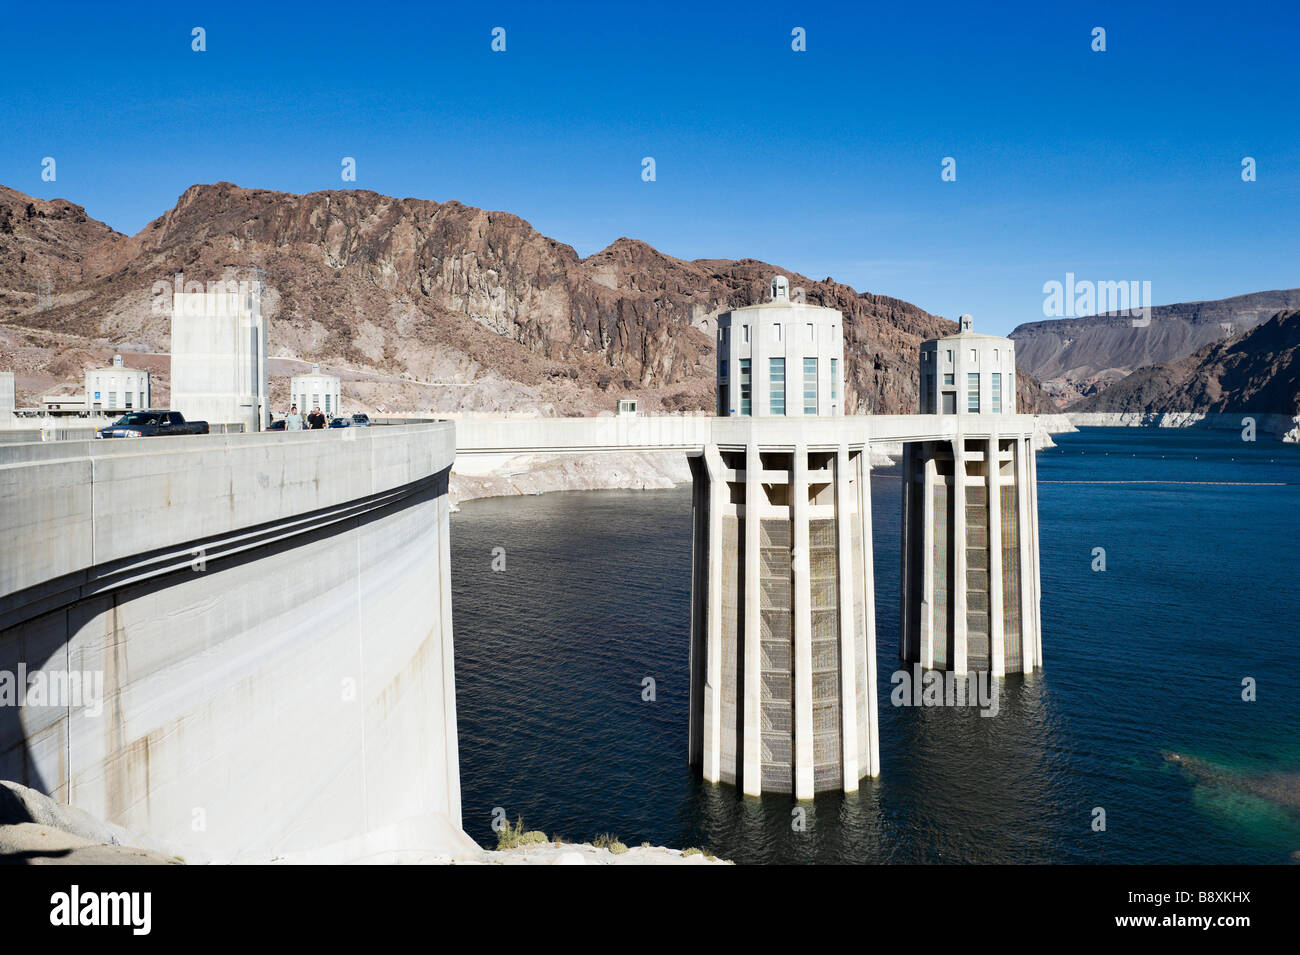 Lake Mead at the Hoover Dam showing the unprecedented low water levels, Arizona/Nevada, USA Stock Photo